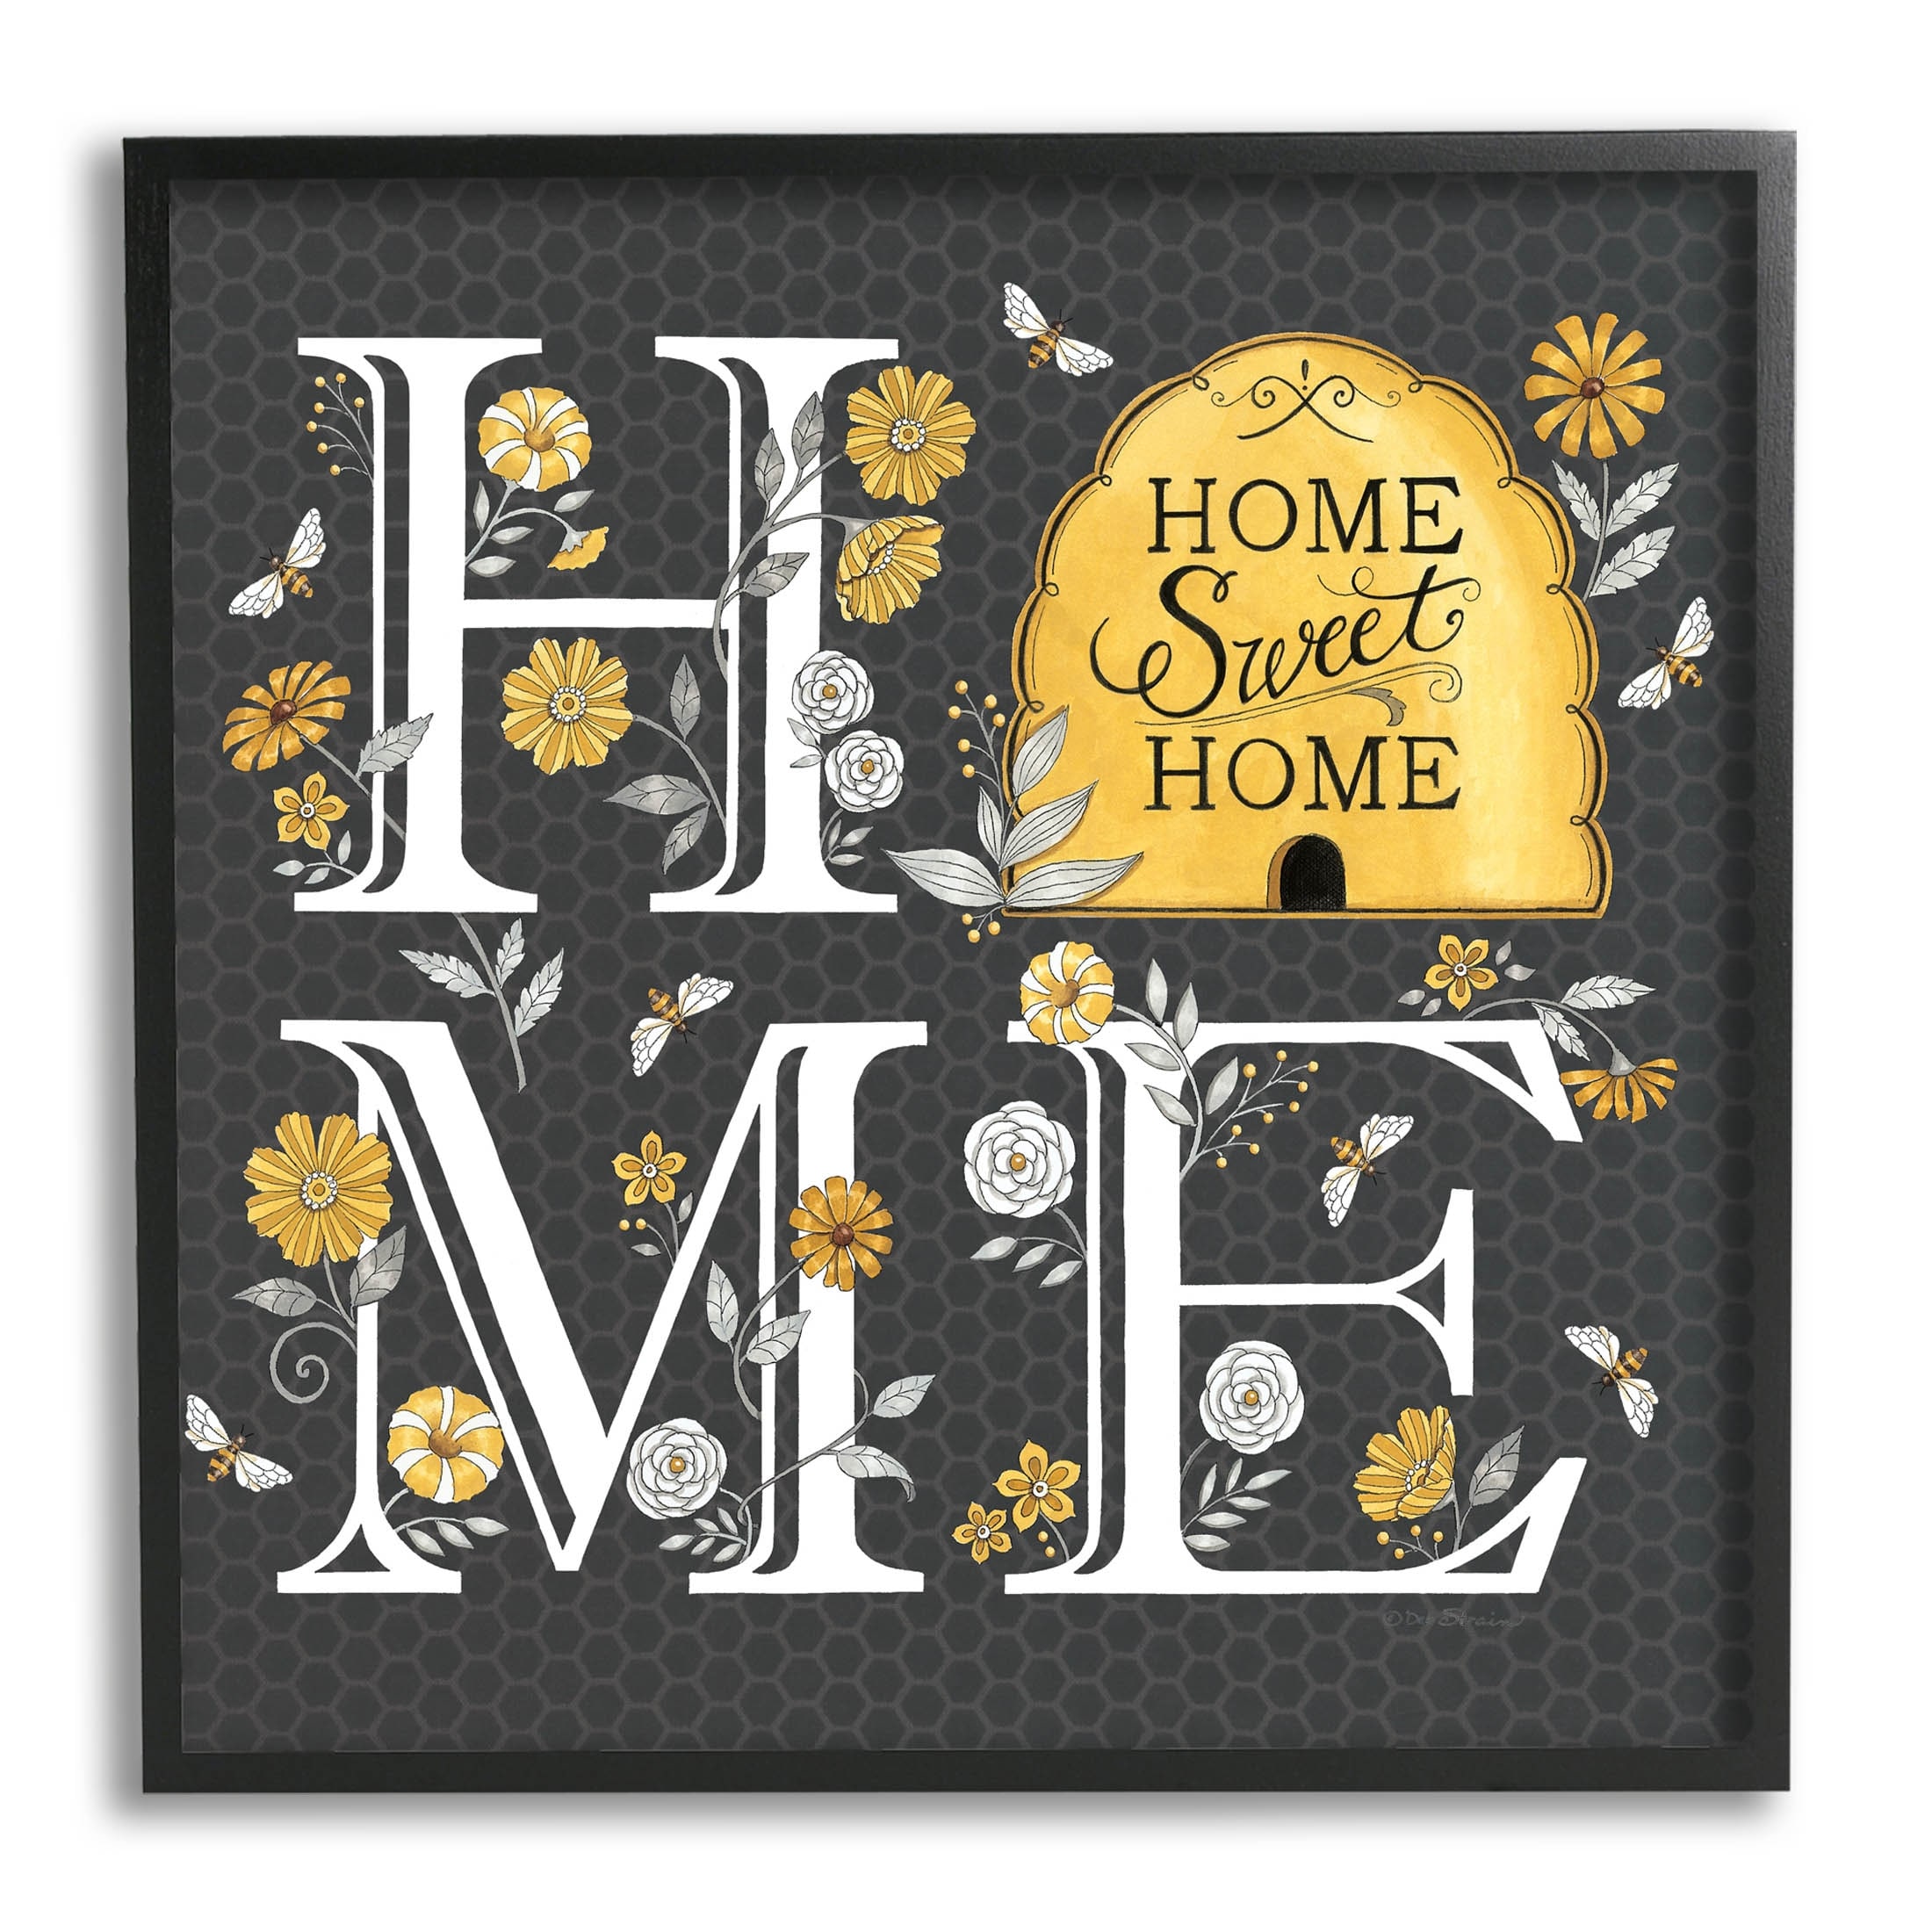 Stupell Hive Pattern Sweet Home Botanicals Framed Giclee Art by Deb Strain  Bed Bath  Beyond 37227701